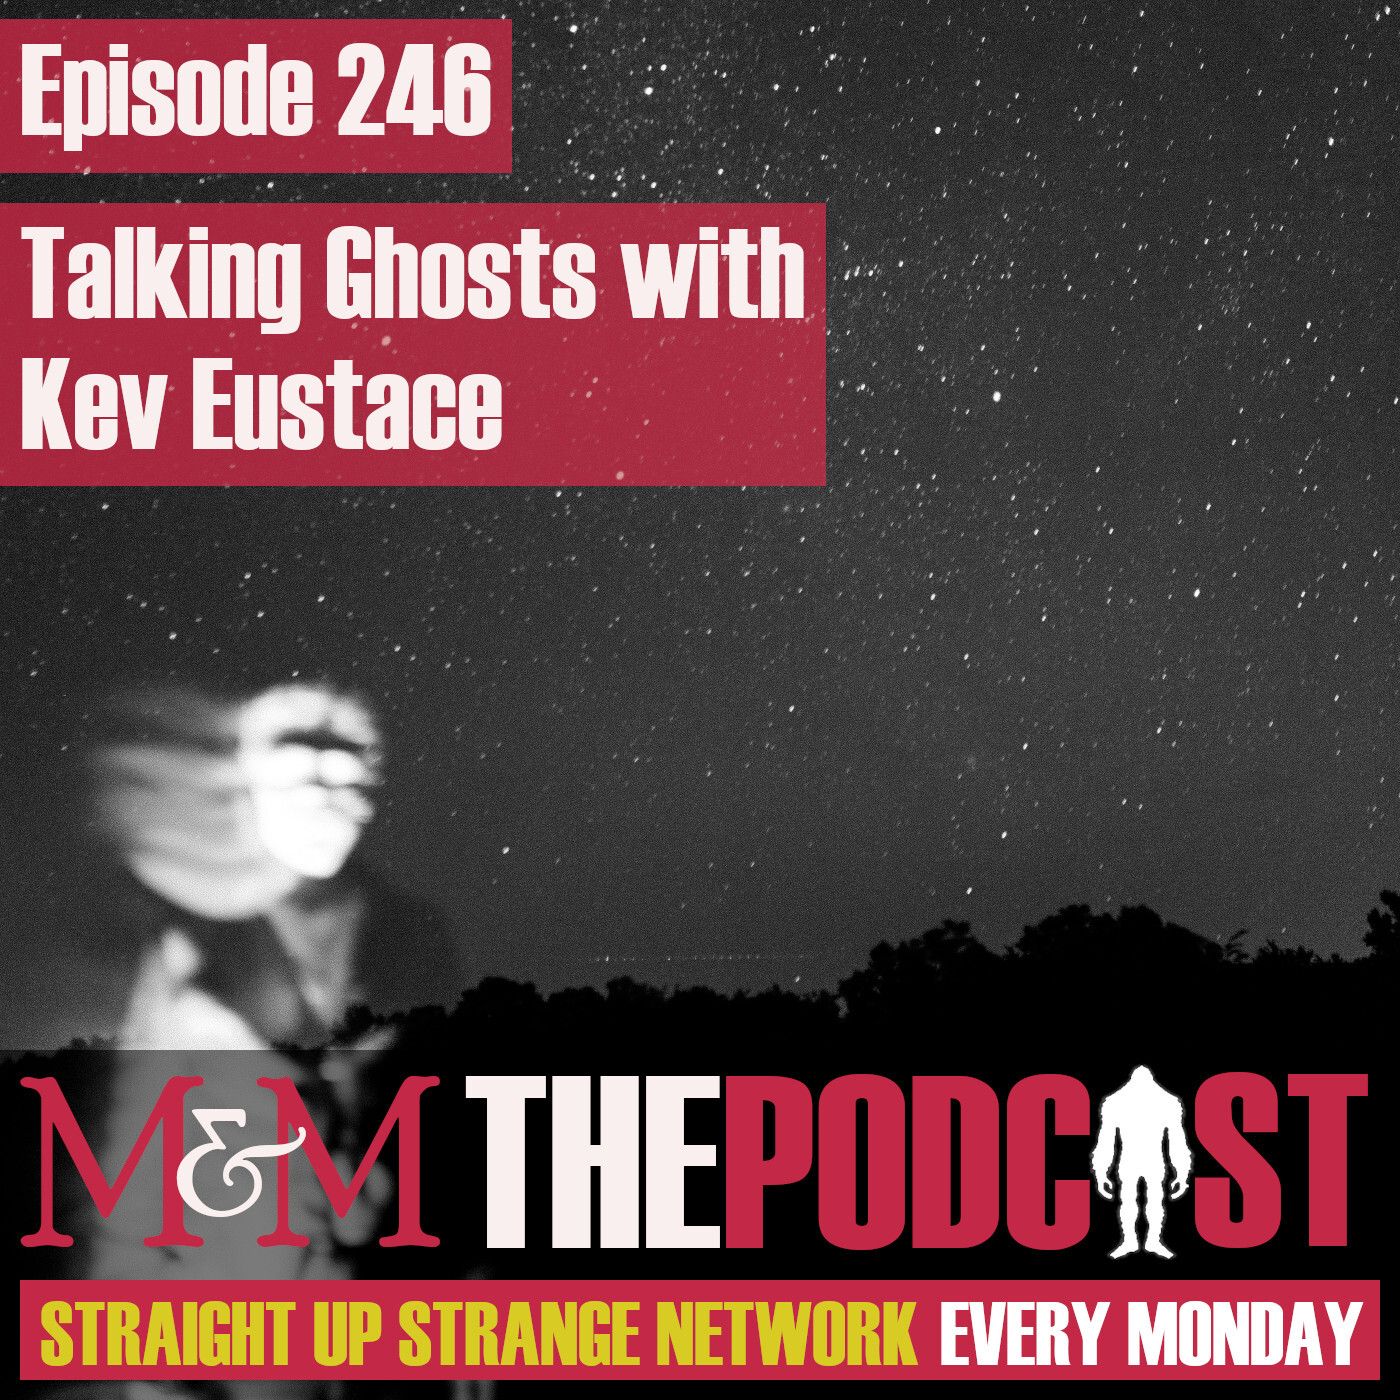 Mysteries and Monsters: Episode 246 Talking Ghosts with Kev Eustace